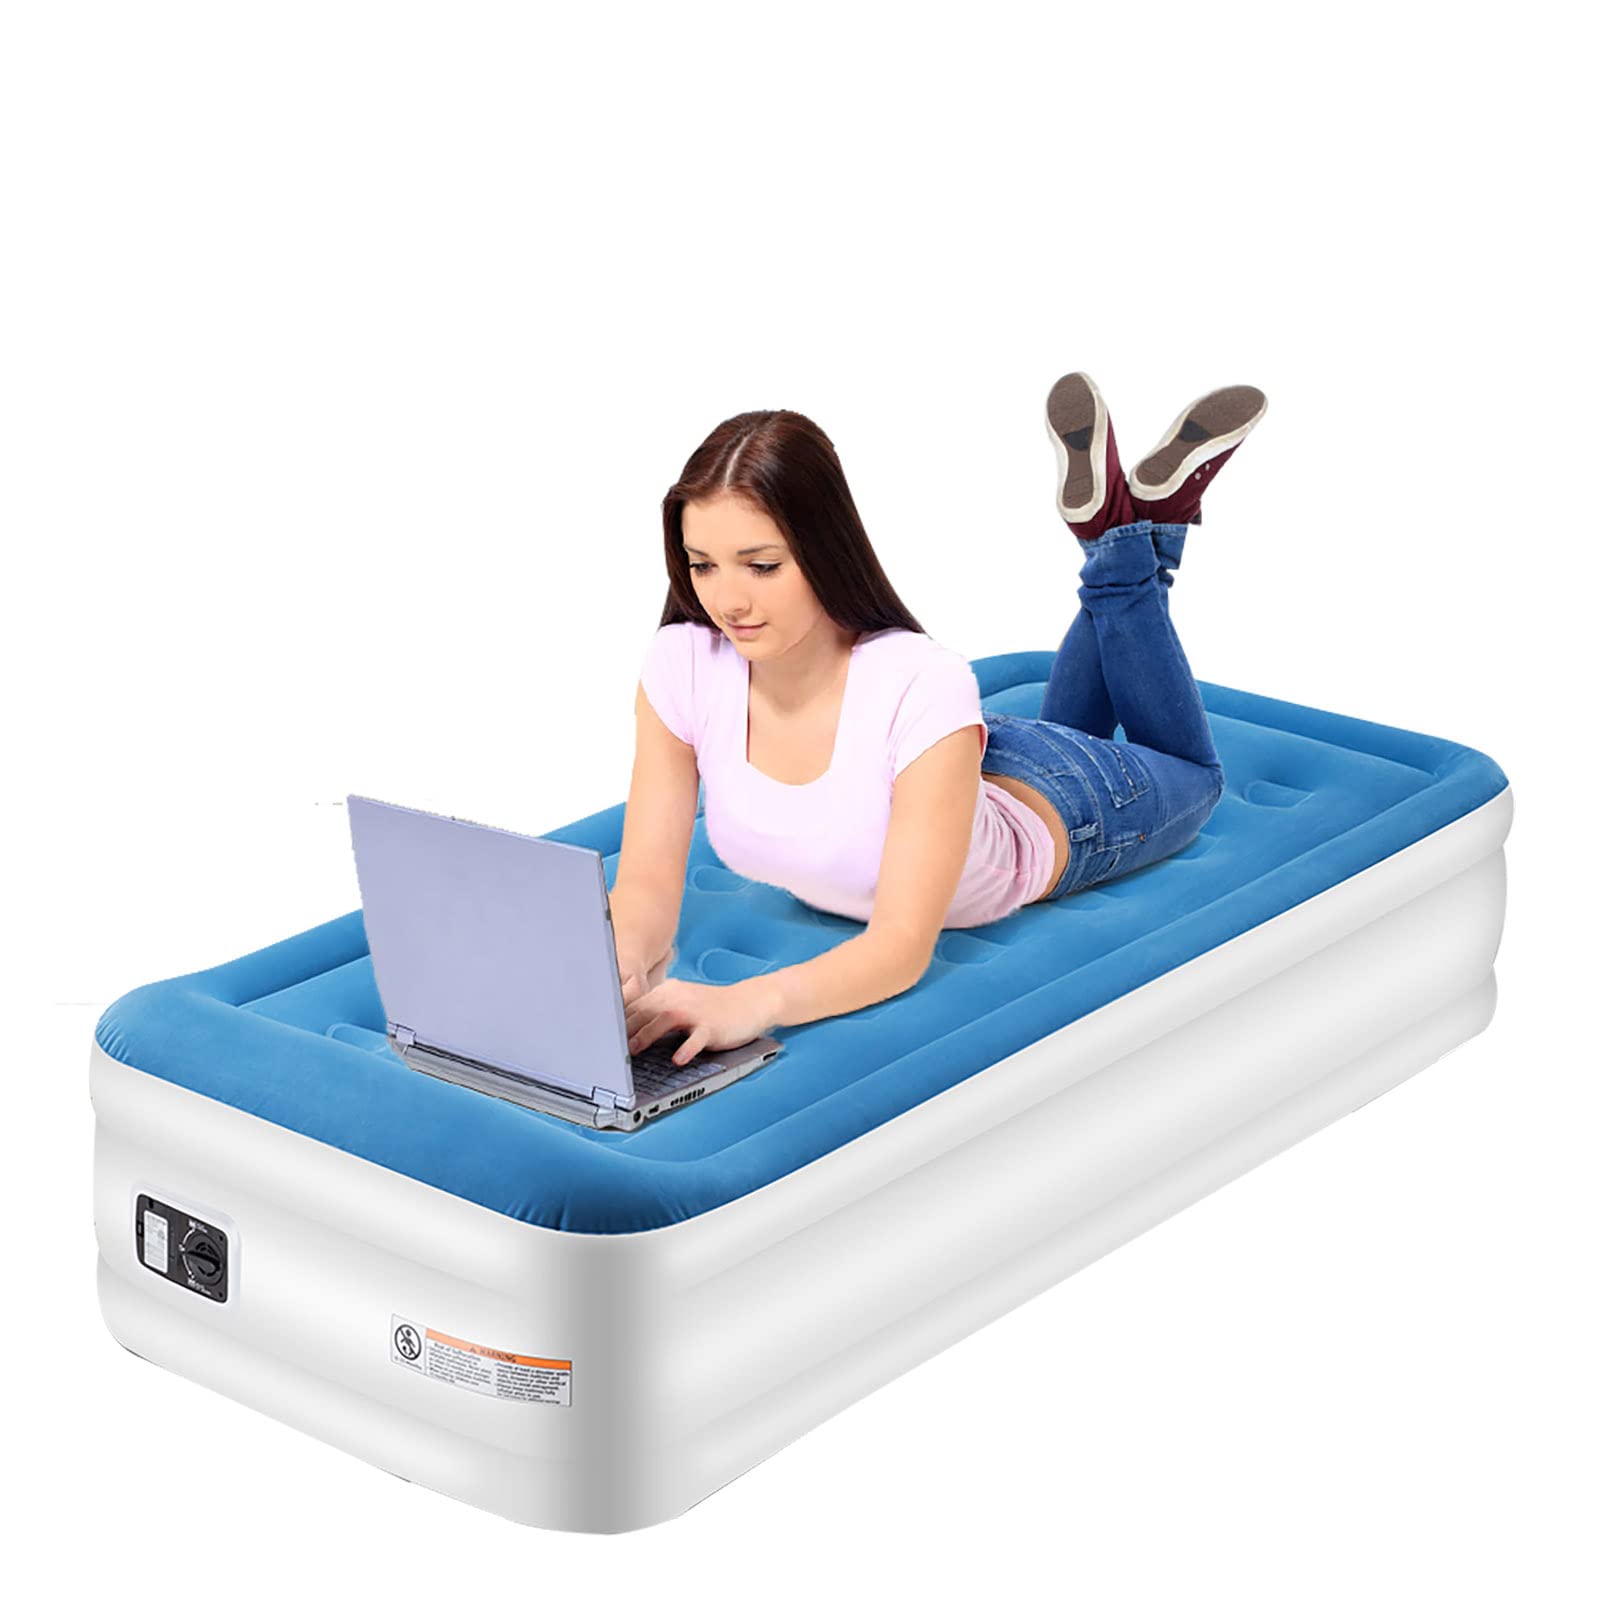 Inflatable Air Mattress with Built-in Electric Pump and Pillow, Twin Size Blow Up Bed with Storage Bag Double Airbed for Family Guests and Travelling